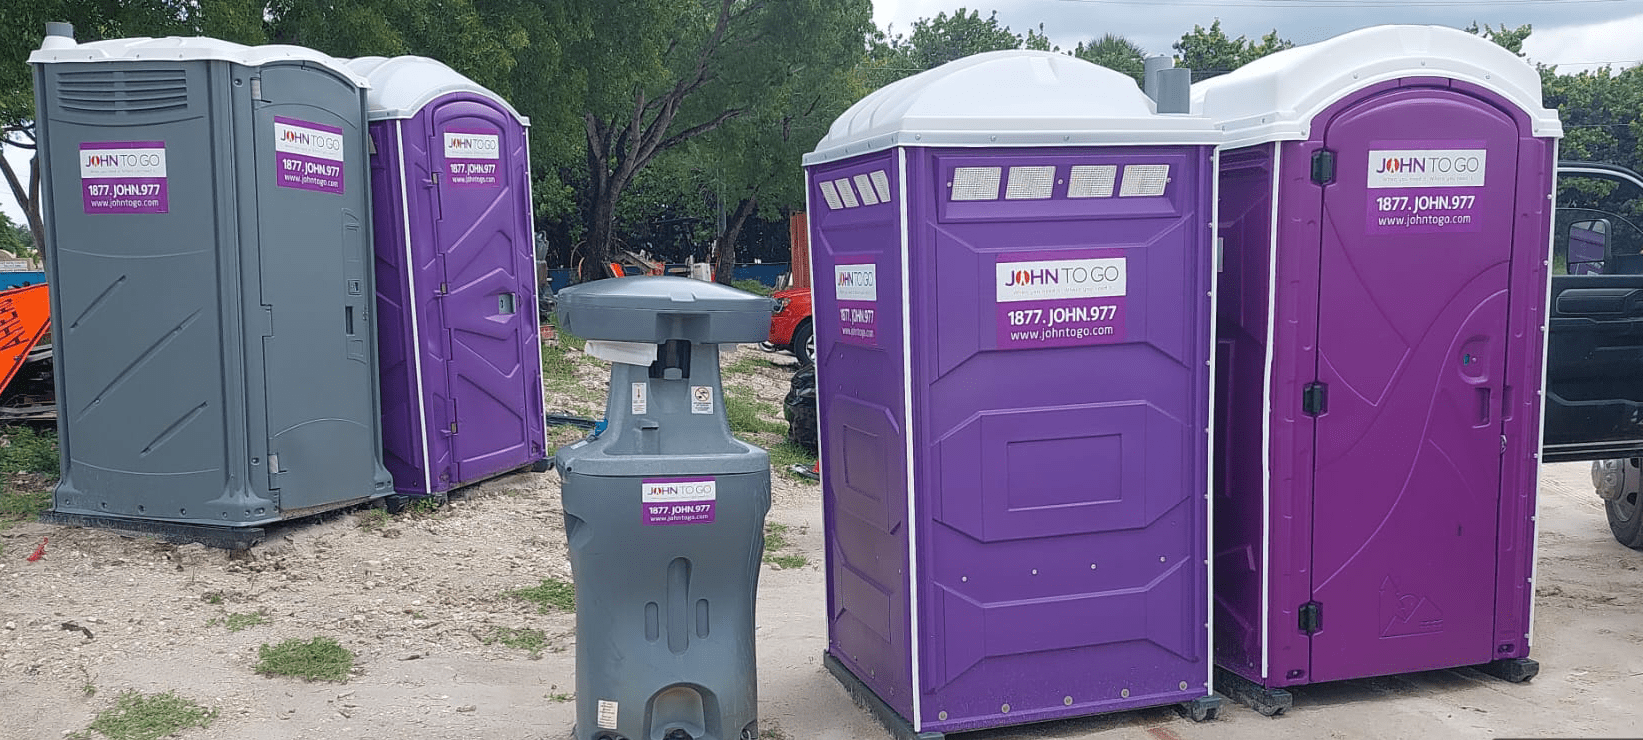 porta potty rental in Suffolk County NY for construction site